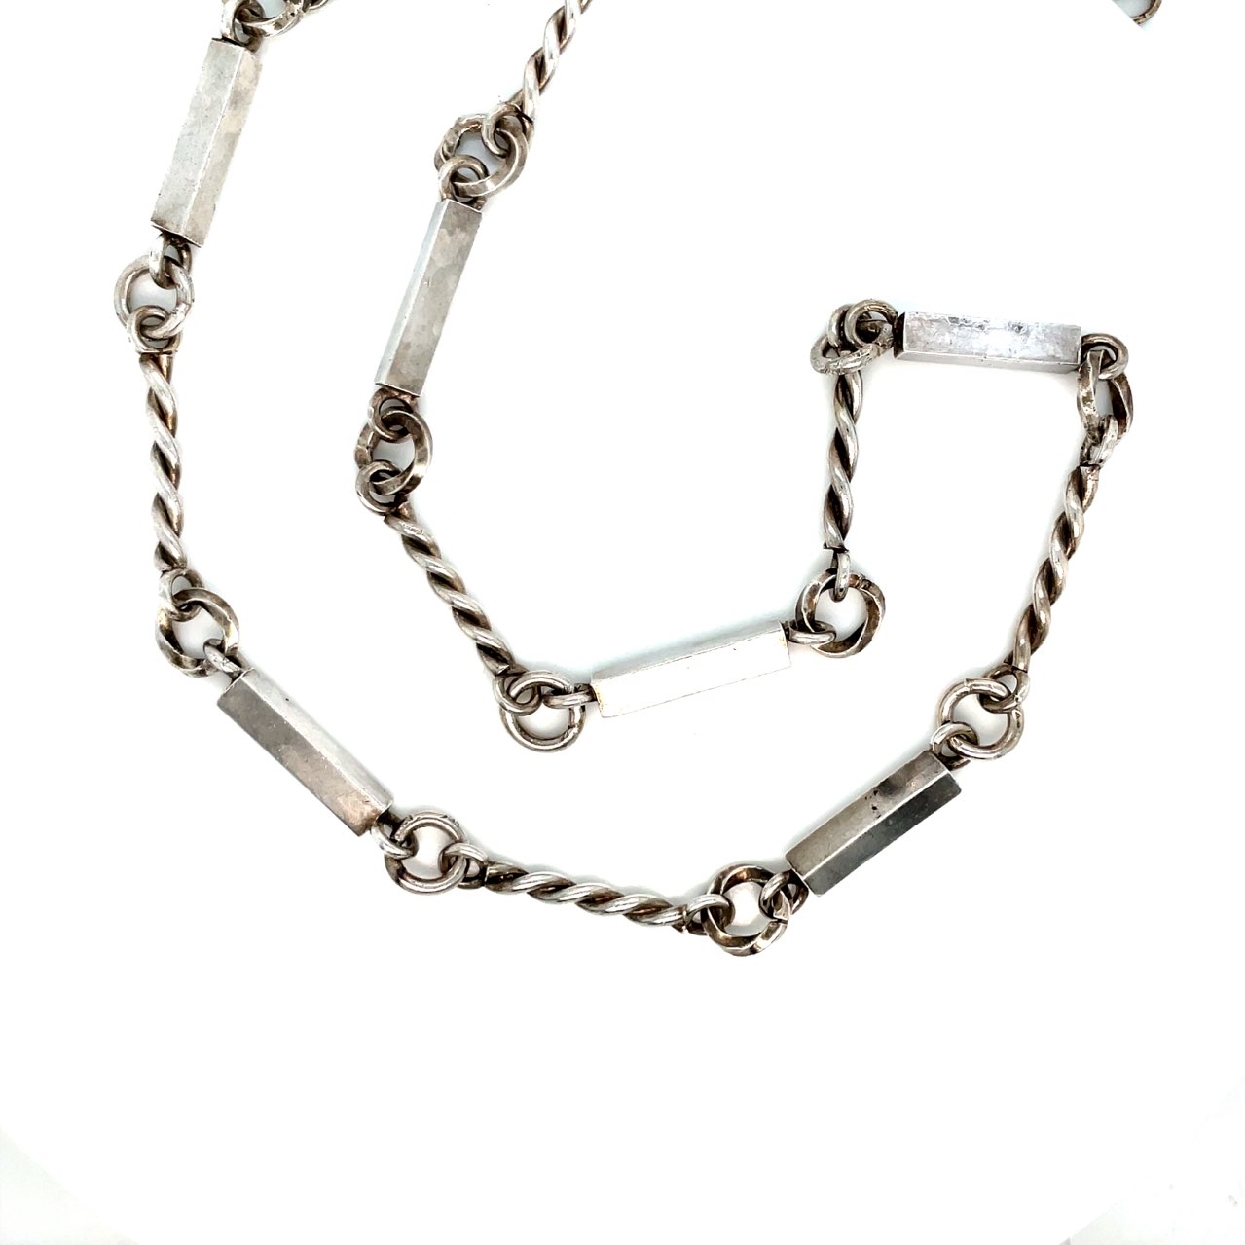 Unique Thick Sterling Silver Chain

22 Inches